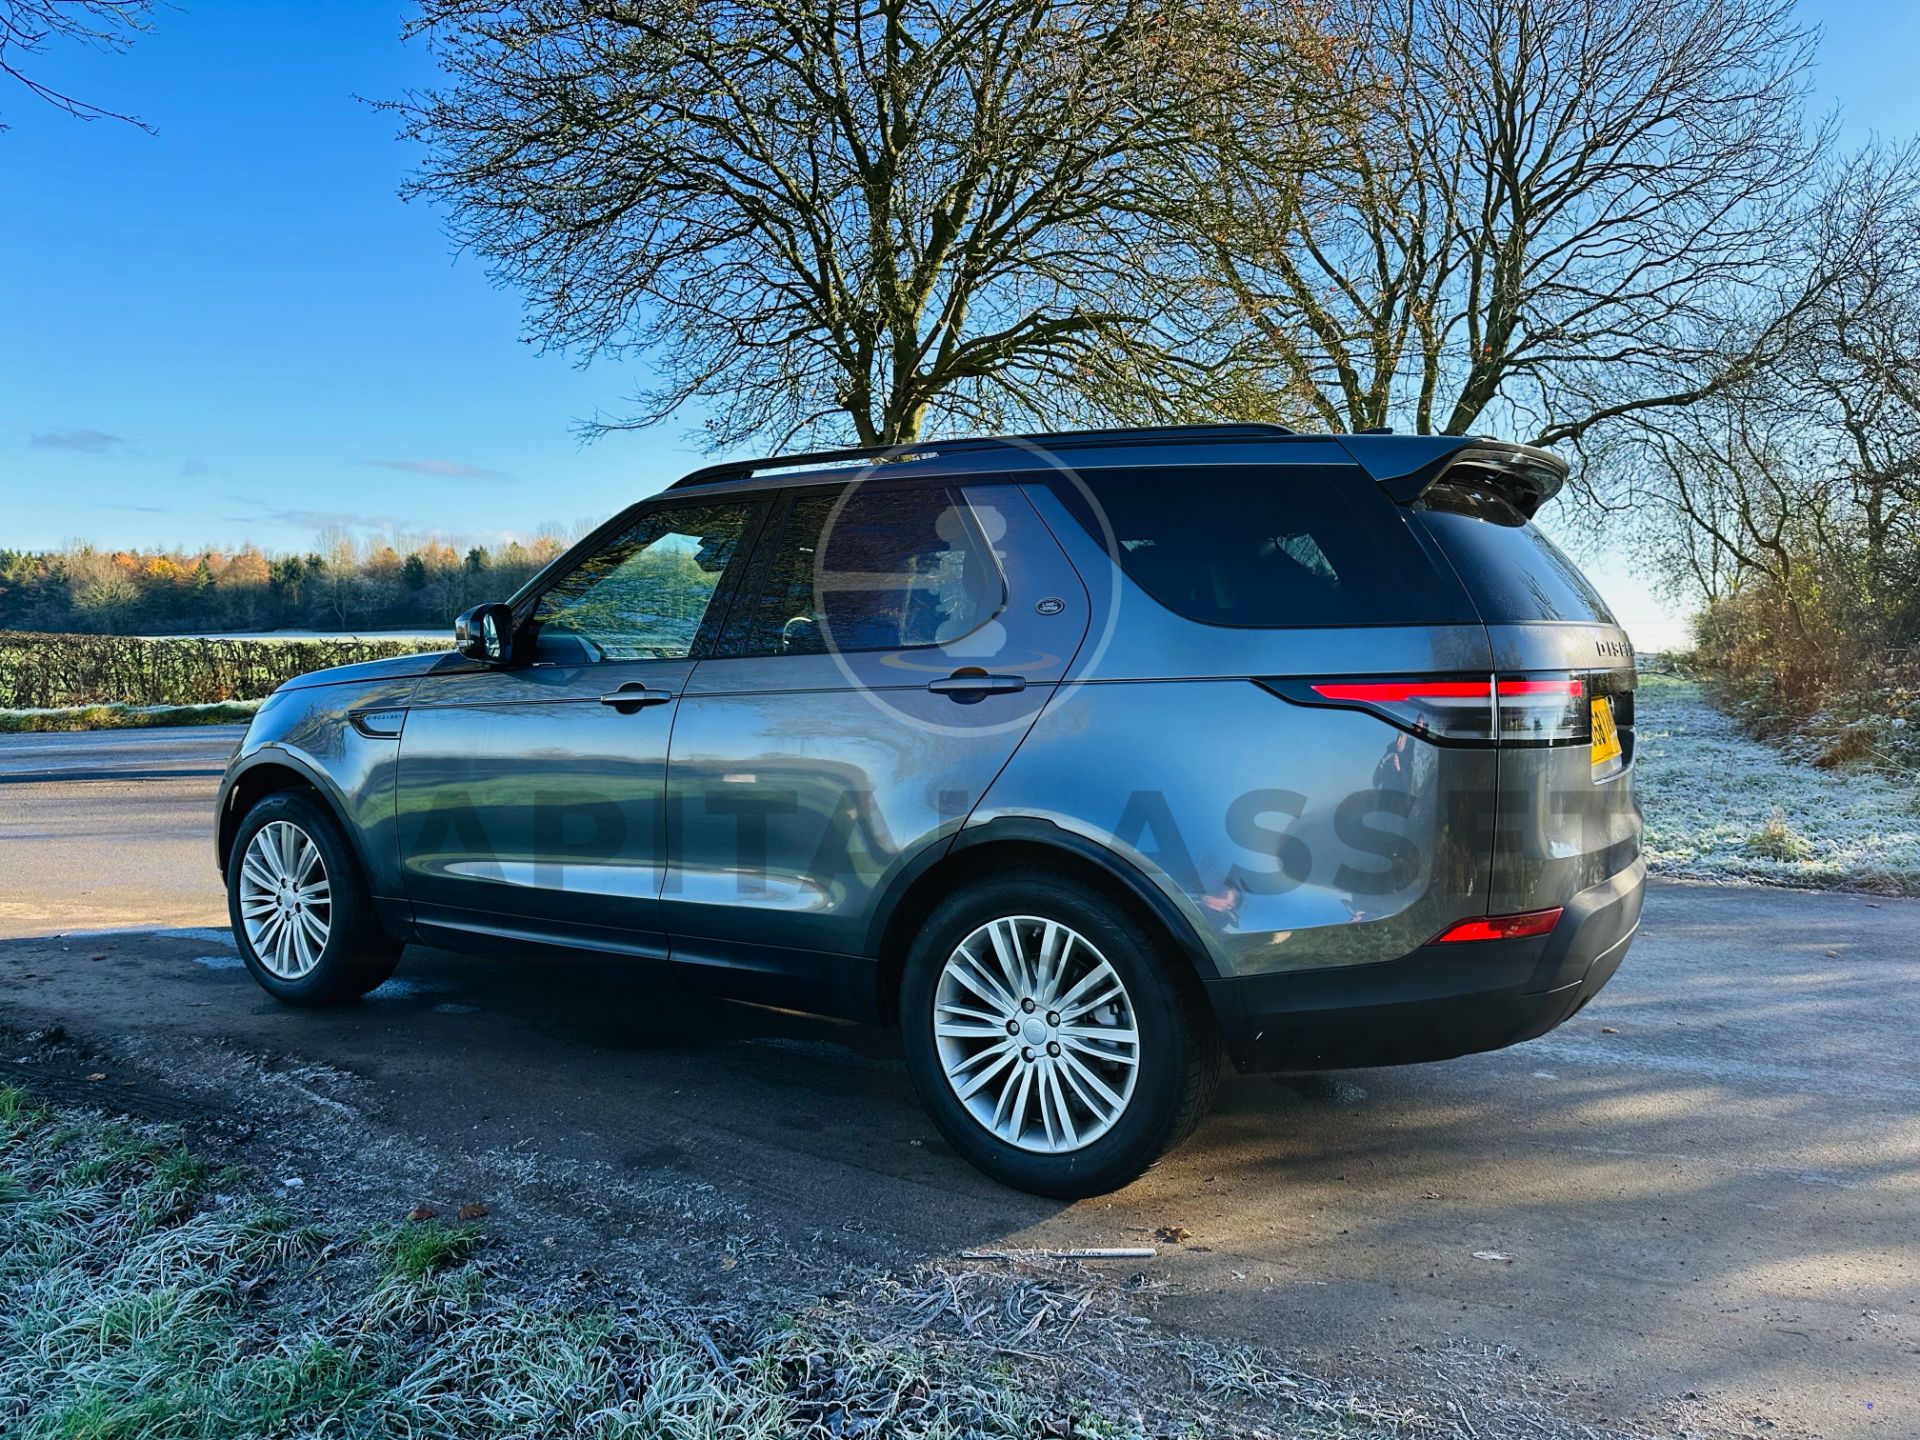 (ON SALE) LAND ROVER DISCOVERY 5 "AUTO DIESEL - 7 SEATER SUV - 2019 MODEL - ONLY 22K MILES FROM NEW - Image 7 of 41